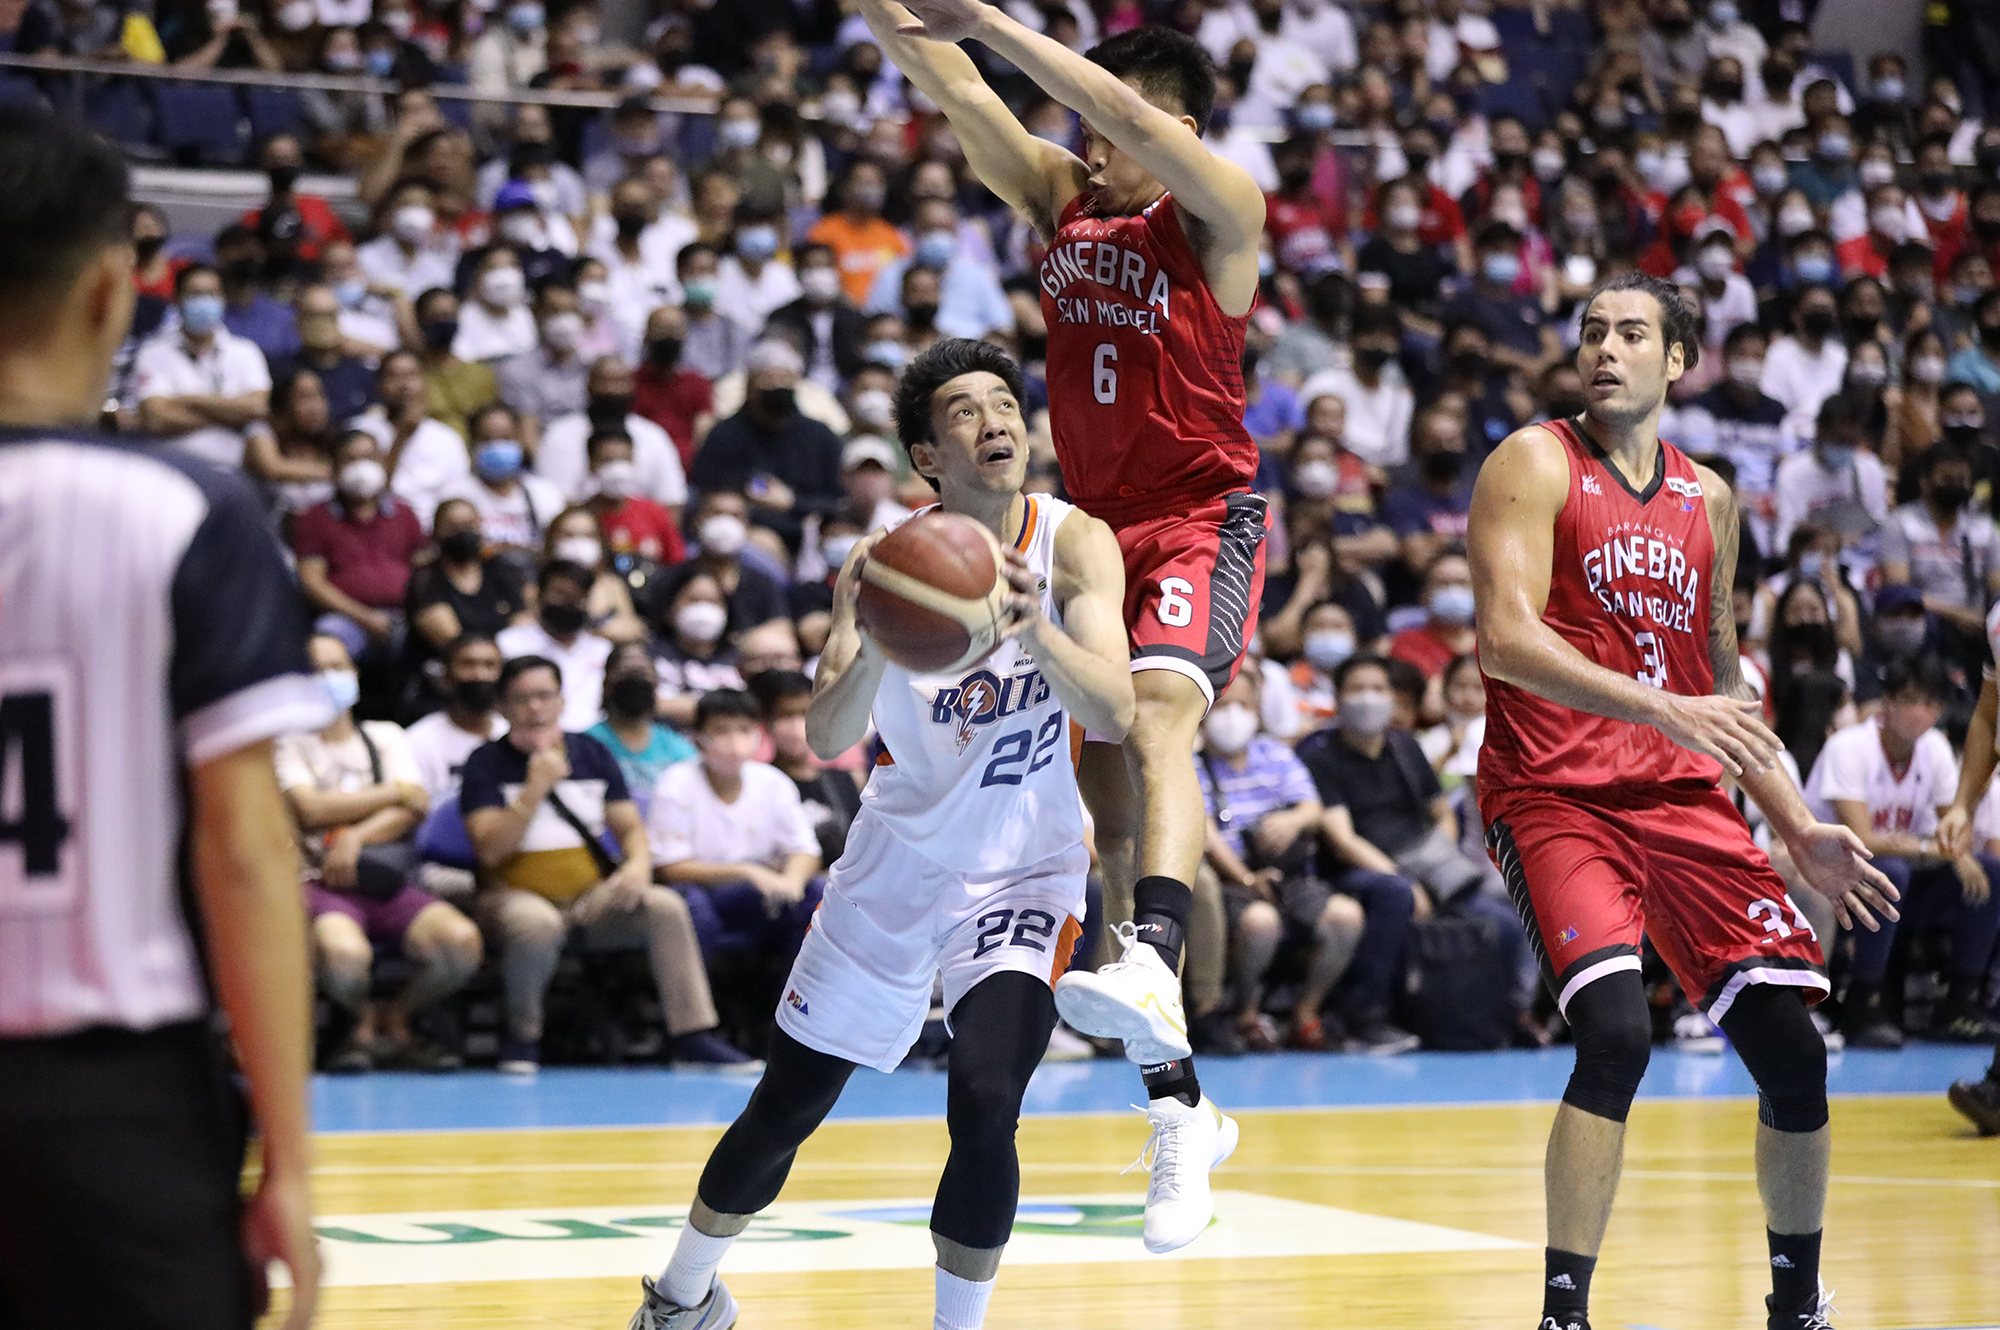 Allein Maliksi leads Meralco's charge in PBA Finals Game 1. PBA IMAGES